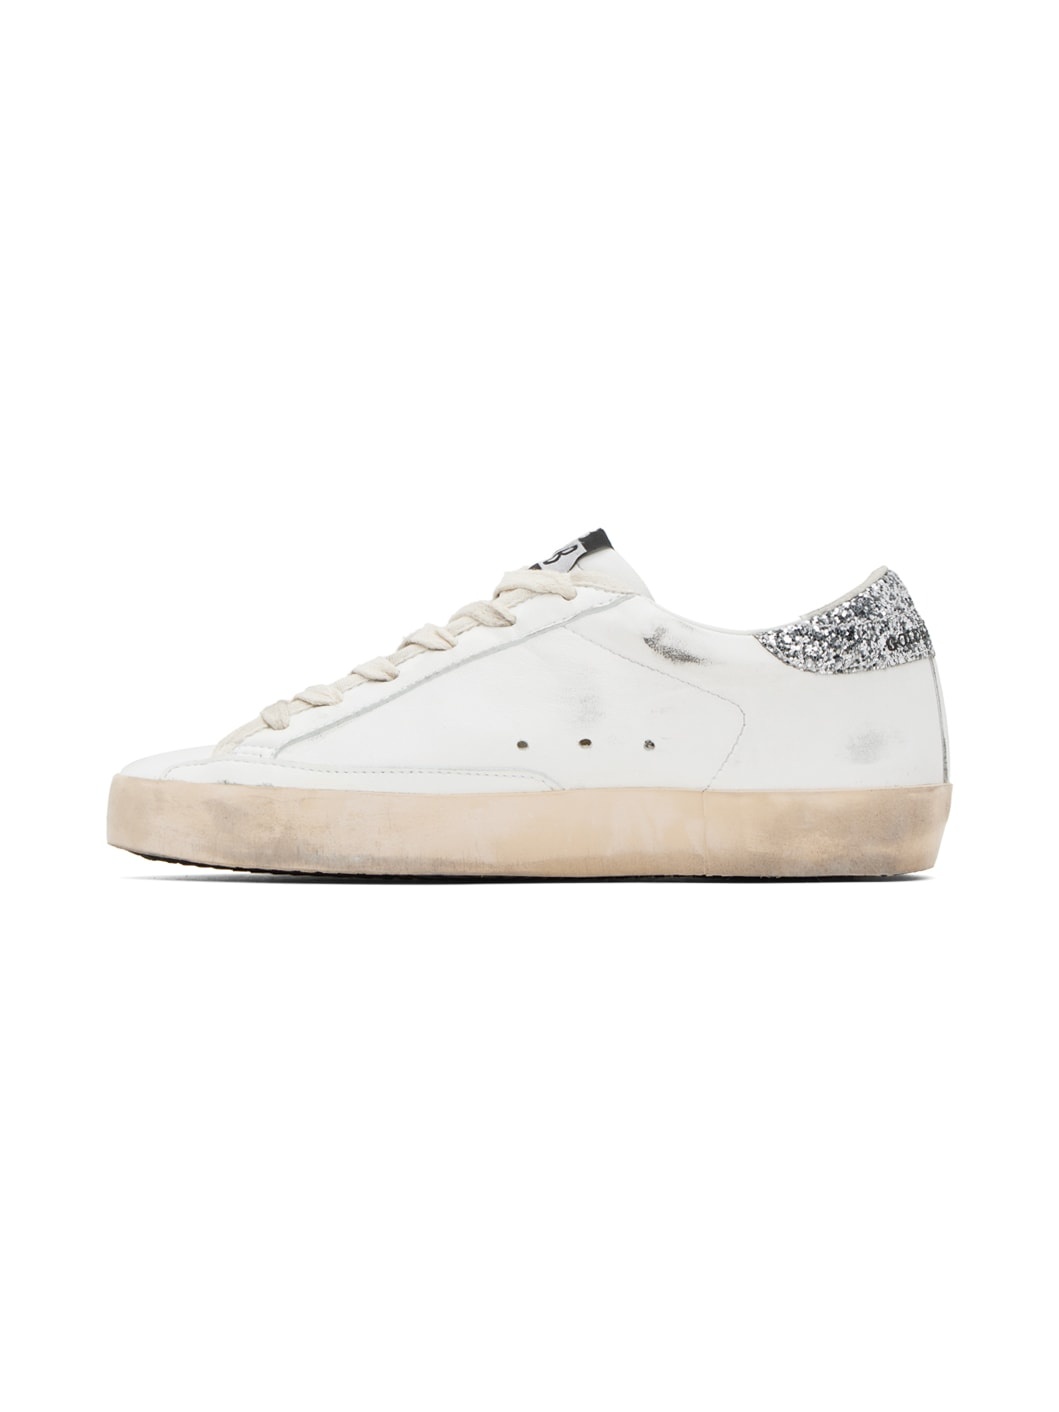 SSENSE Exclusive White Limited Edition Superstar Sneakers - 3